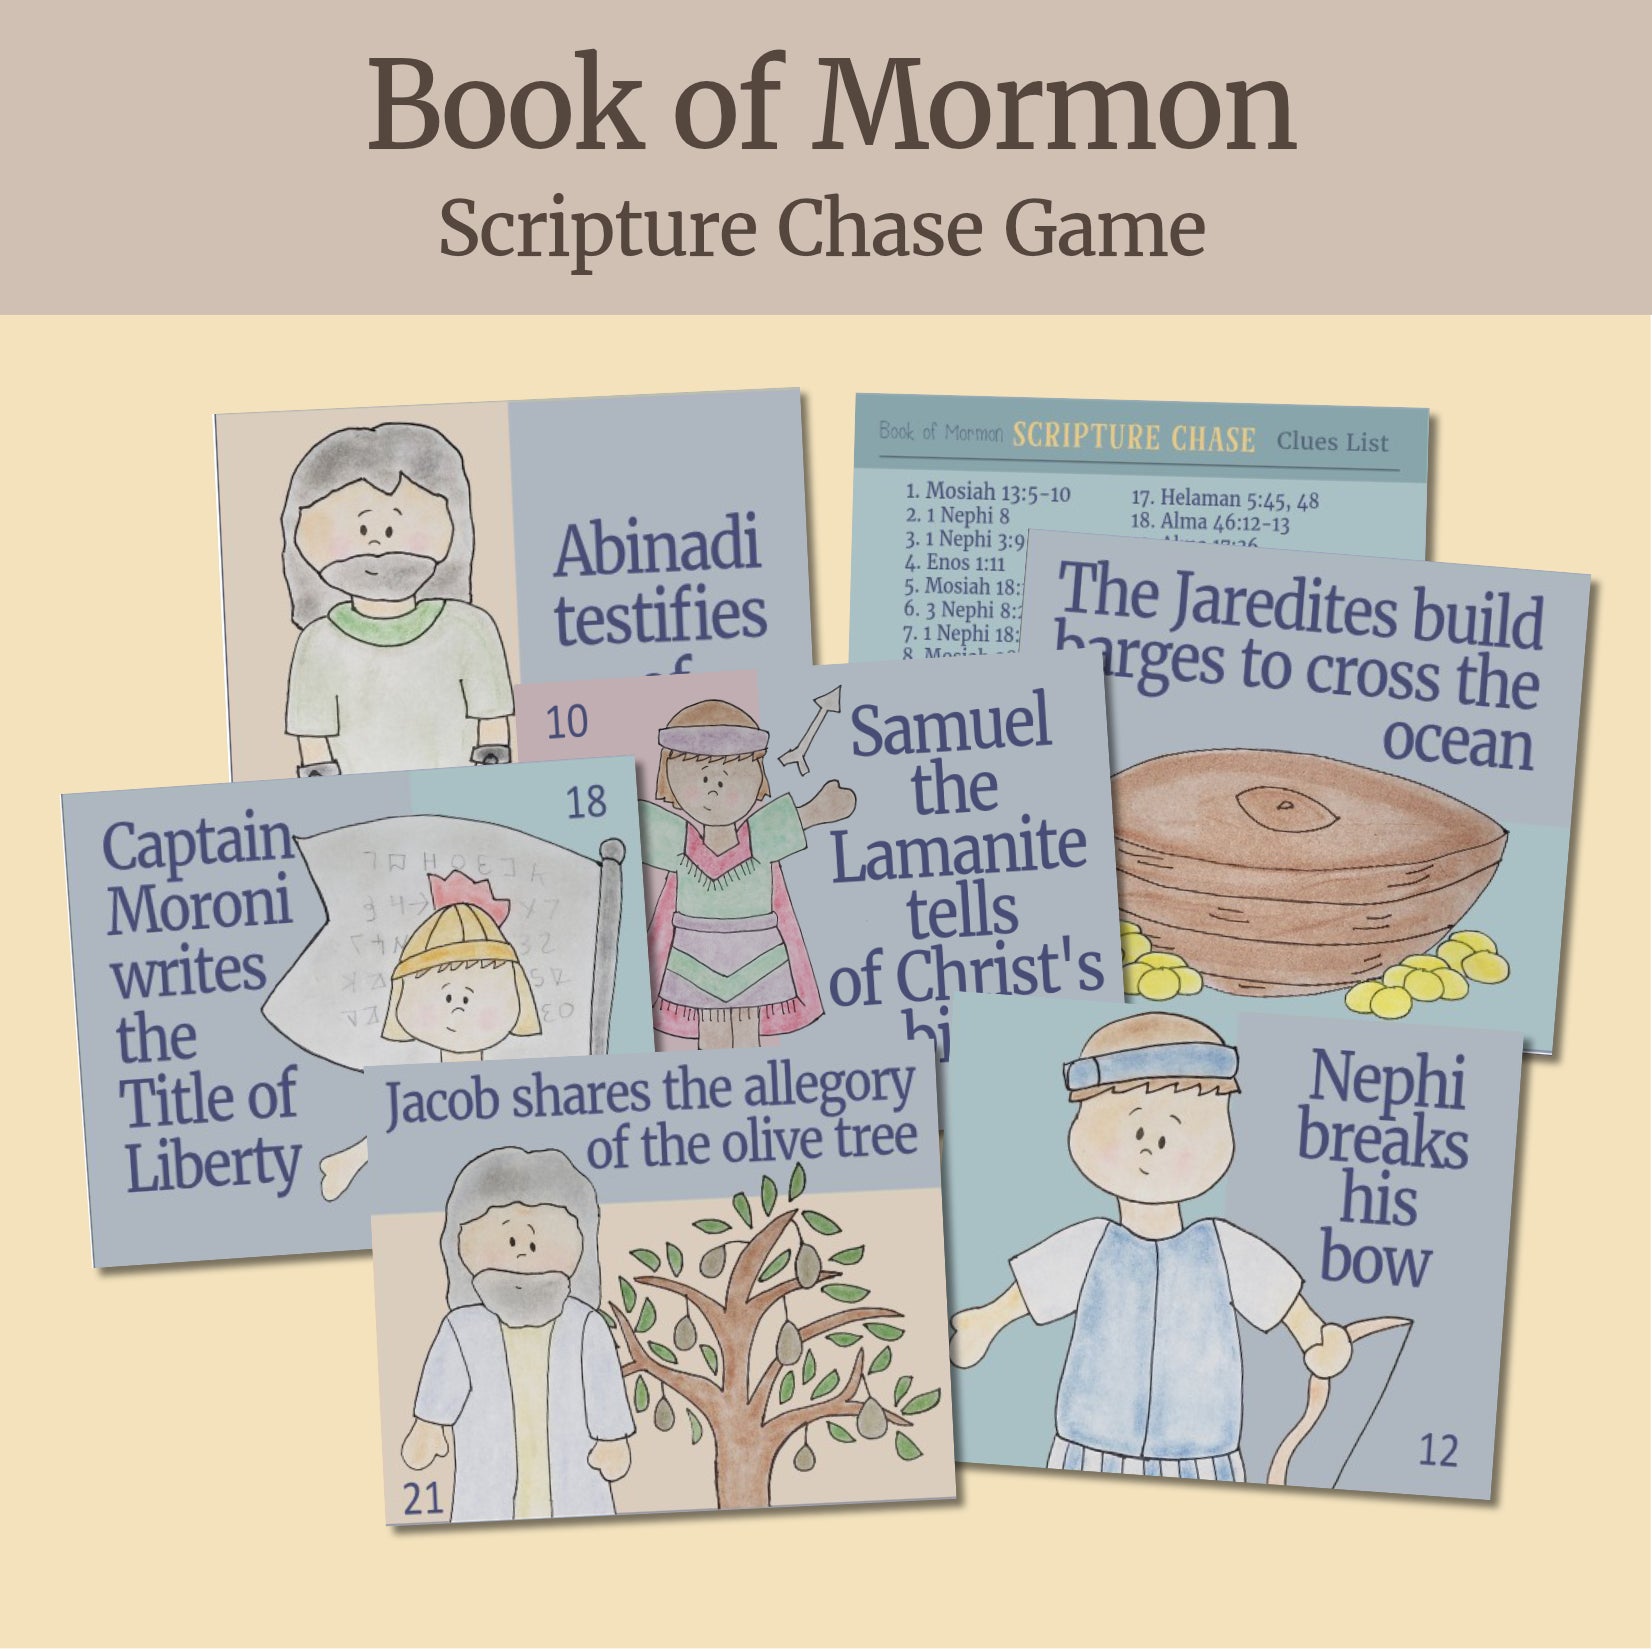 Book of Mormon S.W.A.T.: Scripture Study with a Twist Game